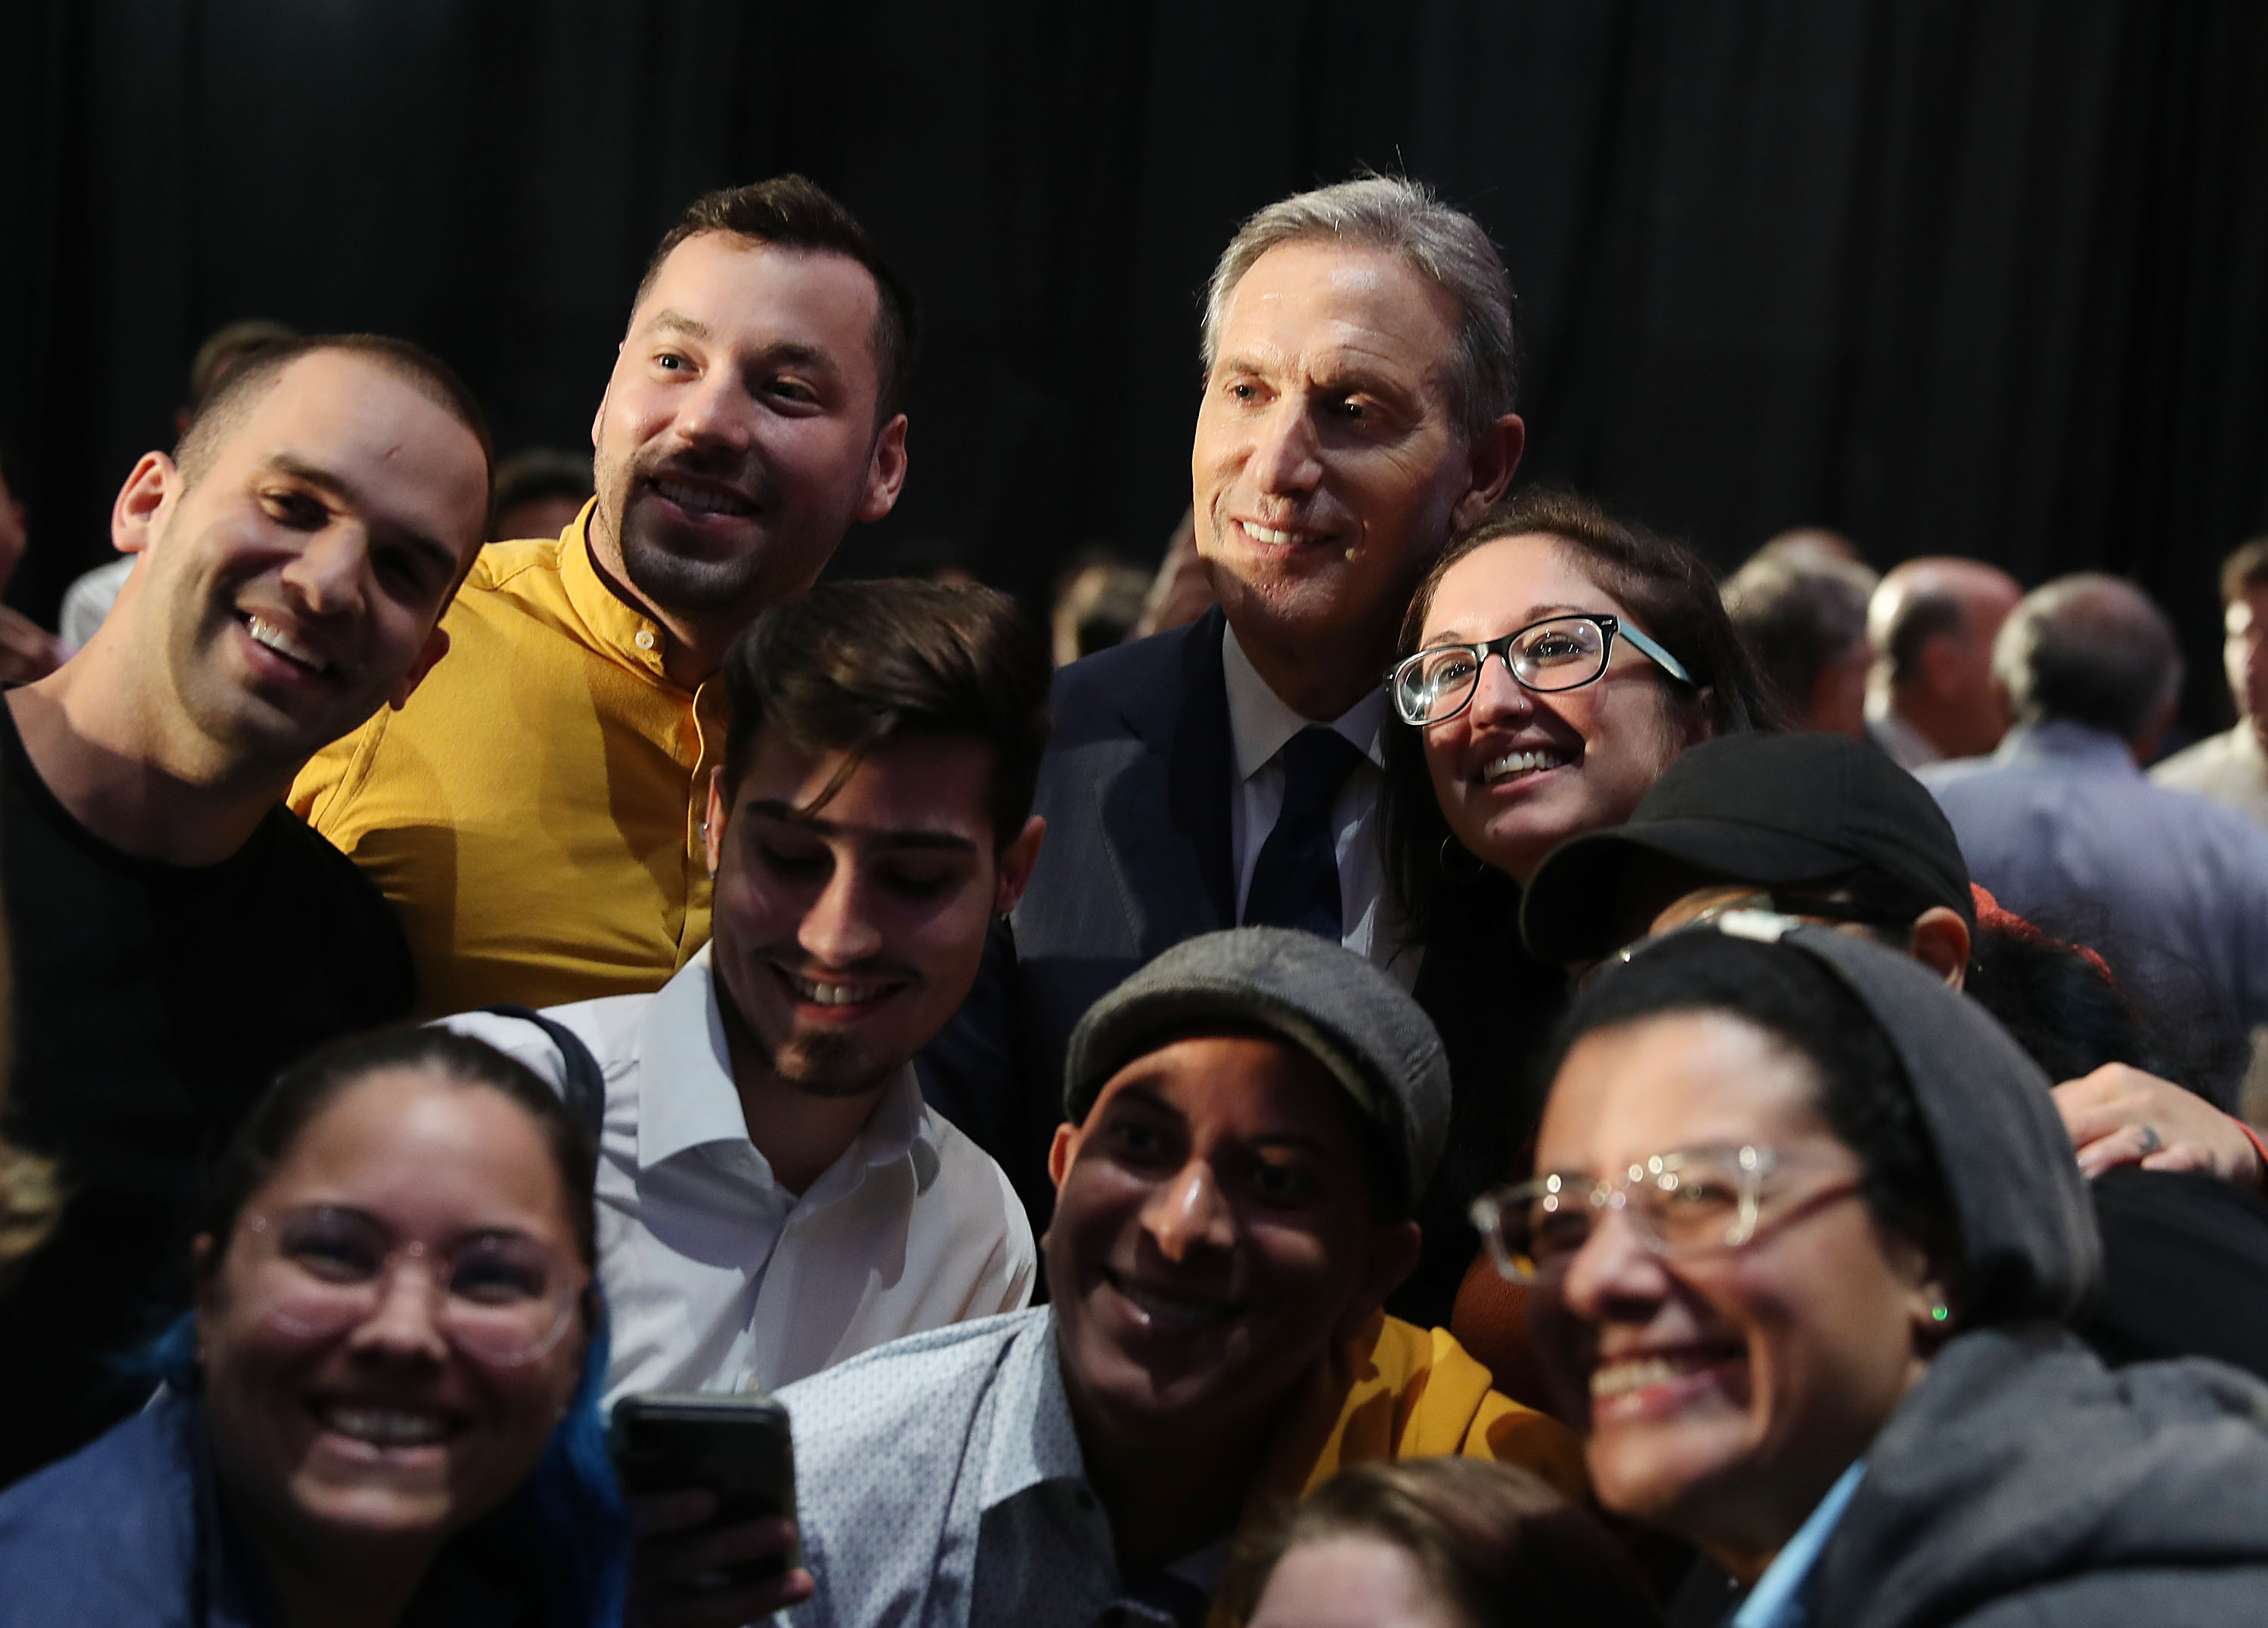 Former Starbucks CEO Howard Schultz poses for a picture with people during a stop at Miami Dade College as he seeks a possible independent presidency run on March 13, 2019 in Miami, Florida. (Photo by Joe Raedle/Getty Images)